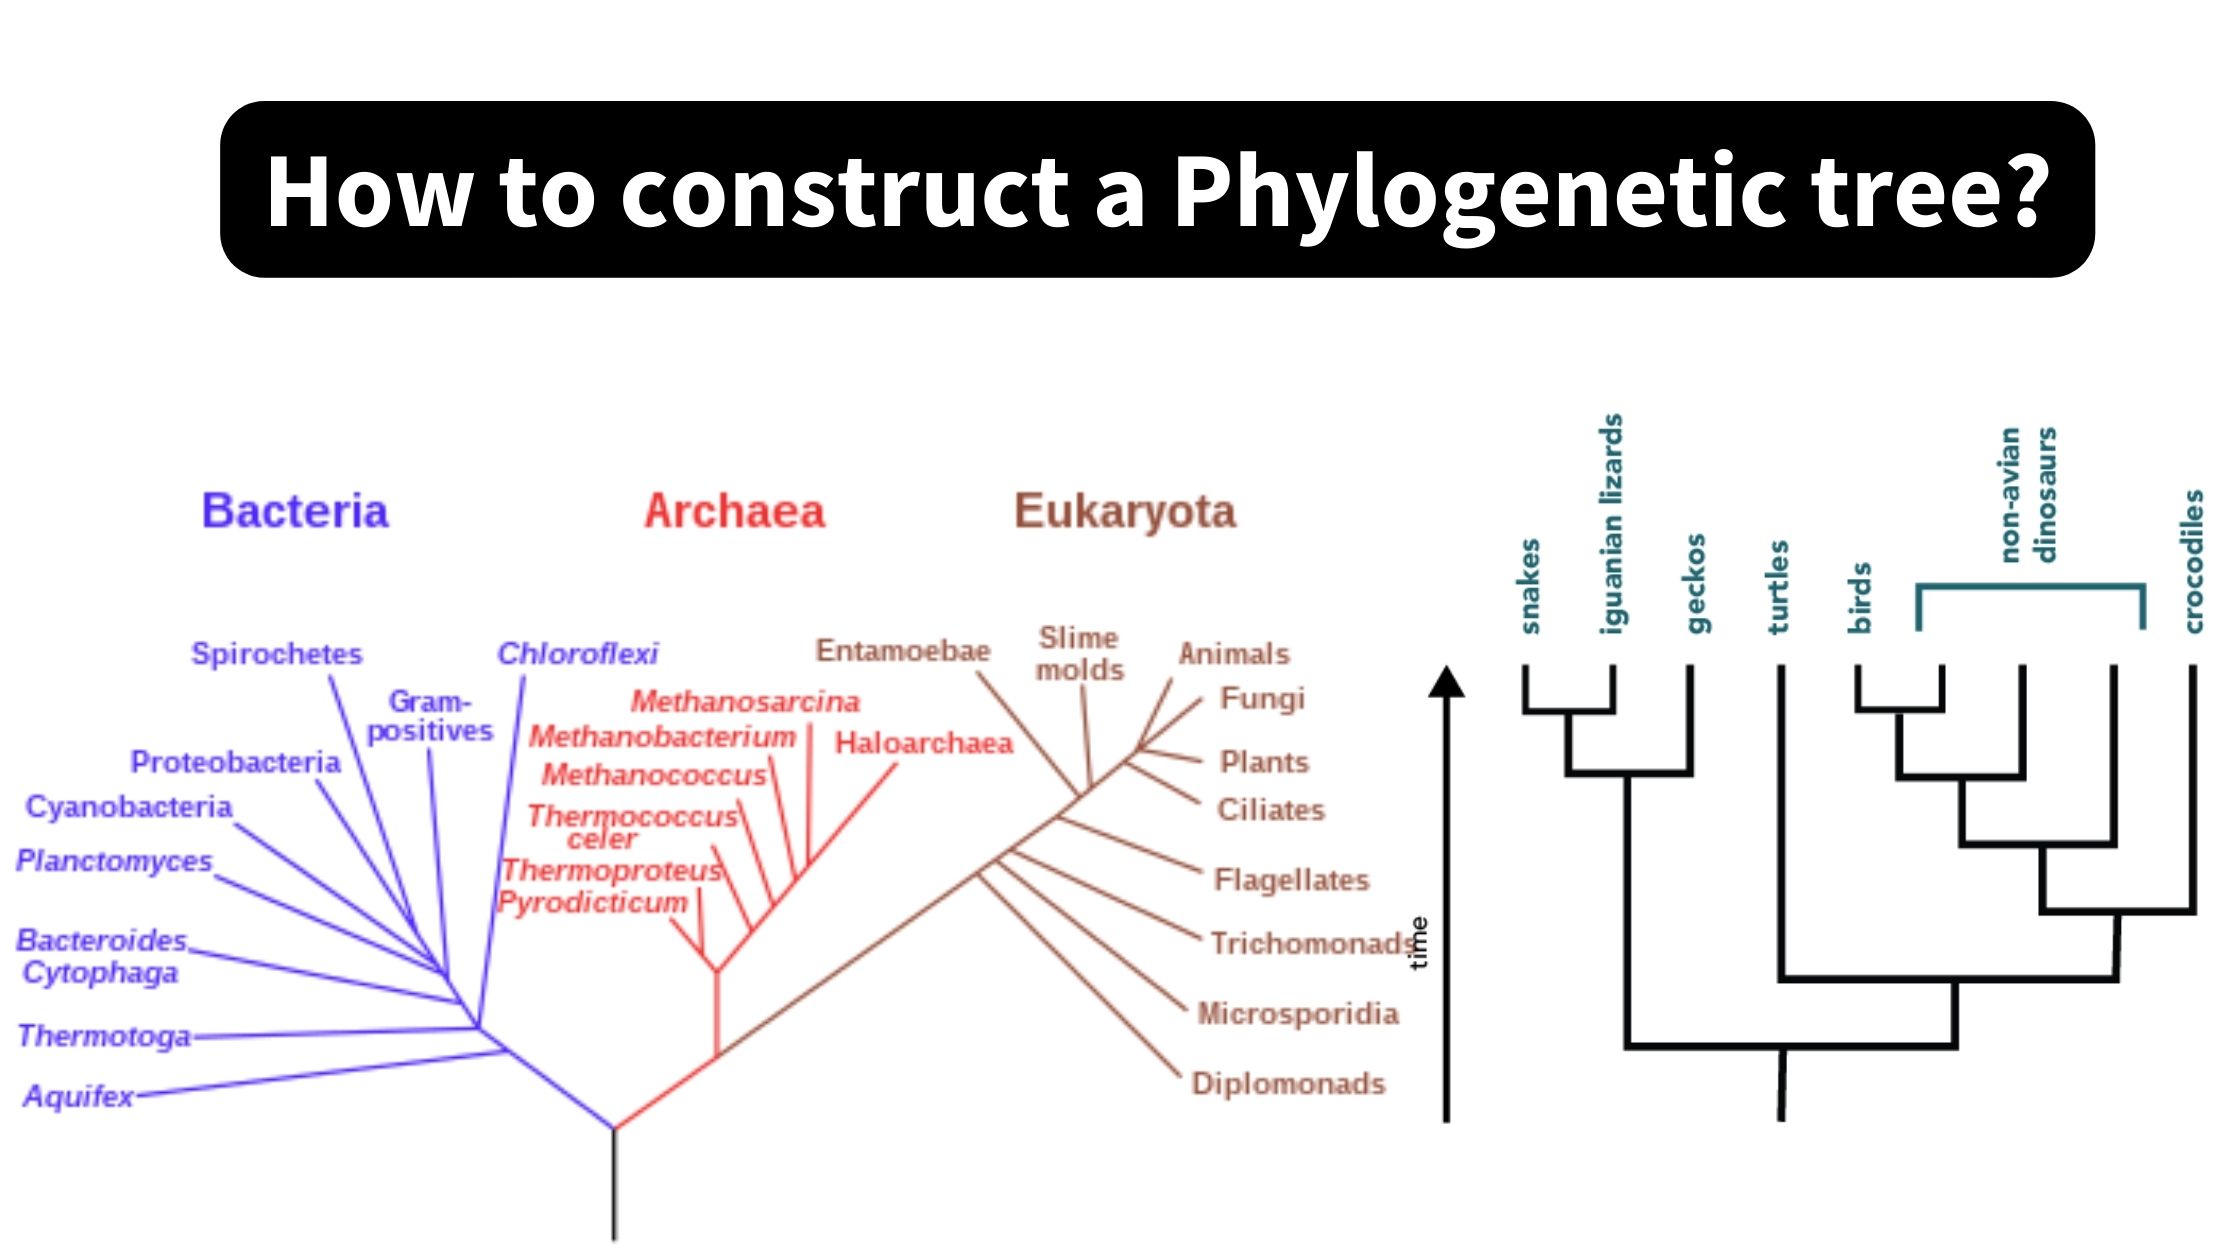 How to construct a Phylogenetic tree?